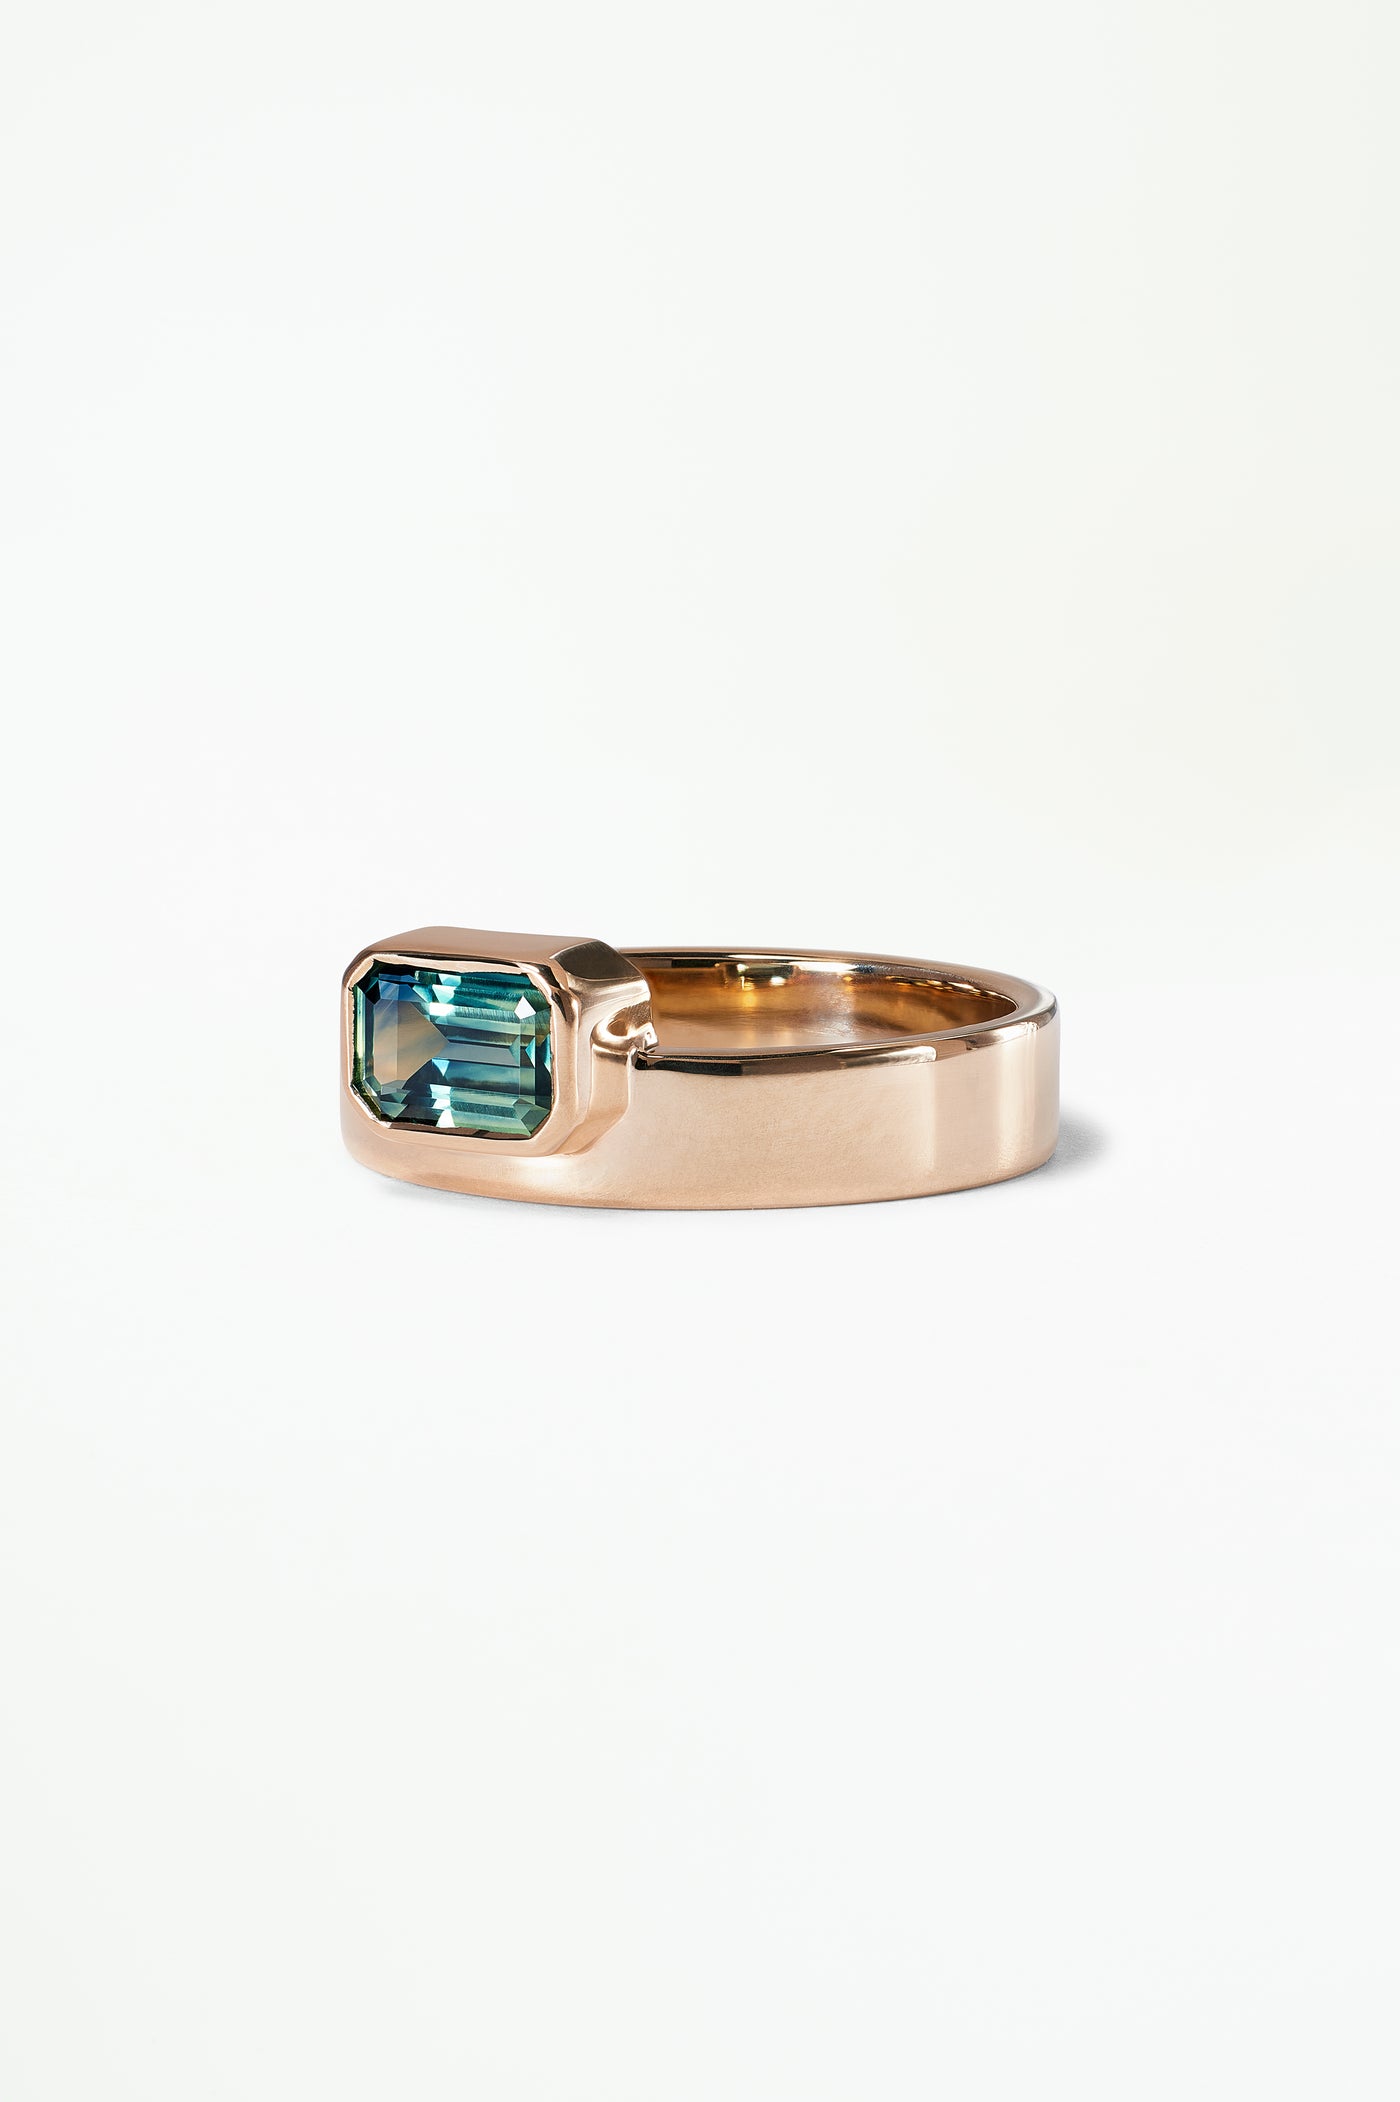 One of a Kind Emerald Cut Bi-Color Green Blue Sapphire Monolith Ring No. 32